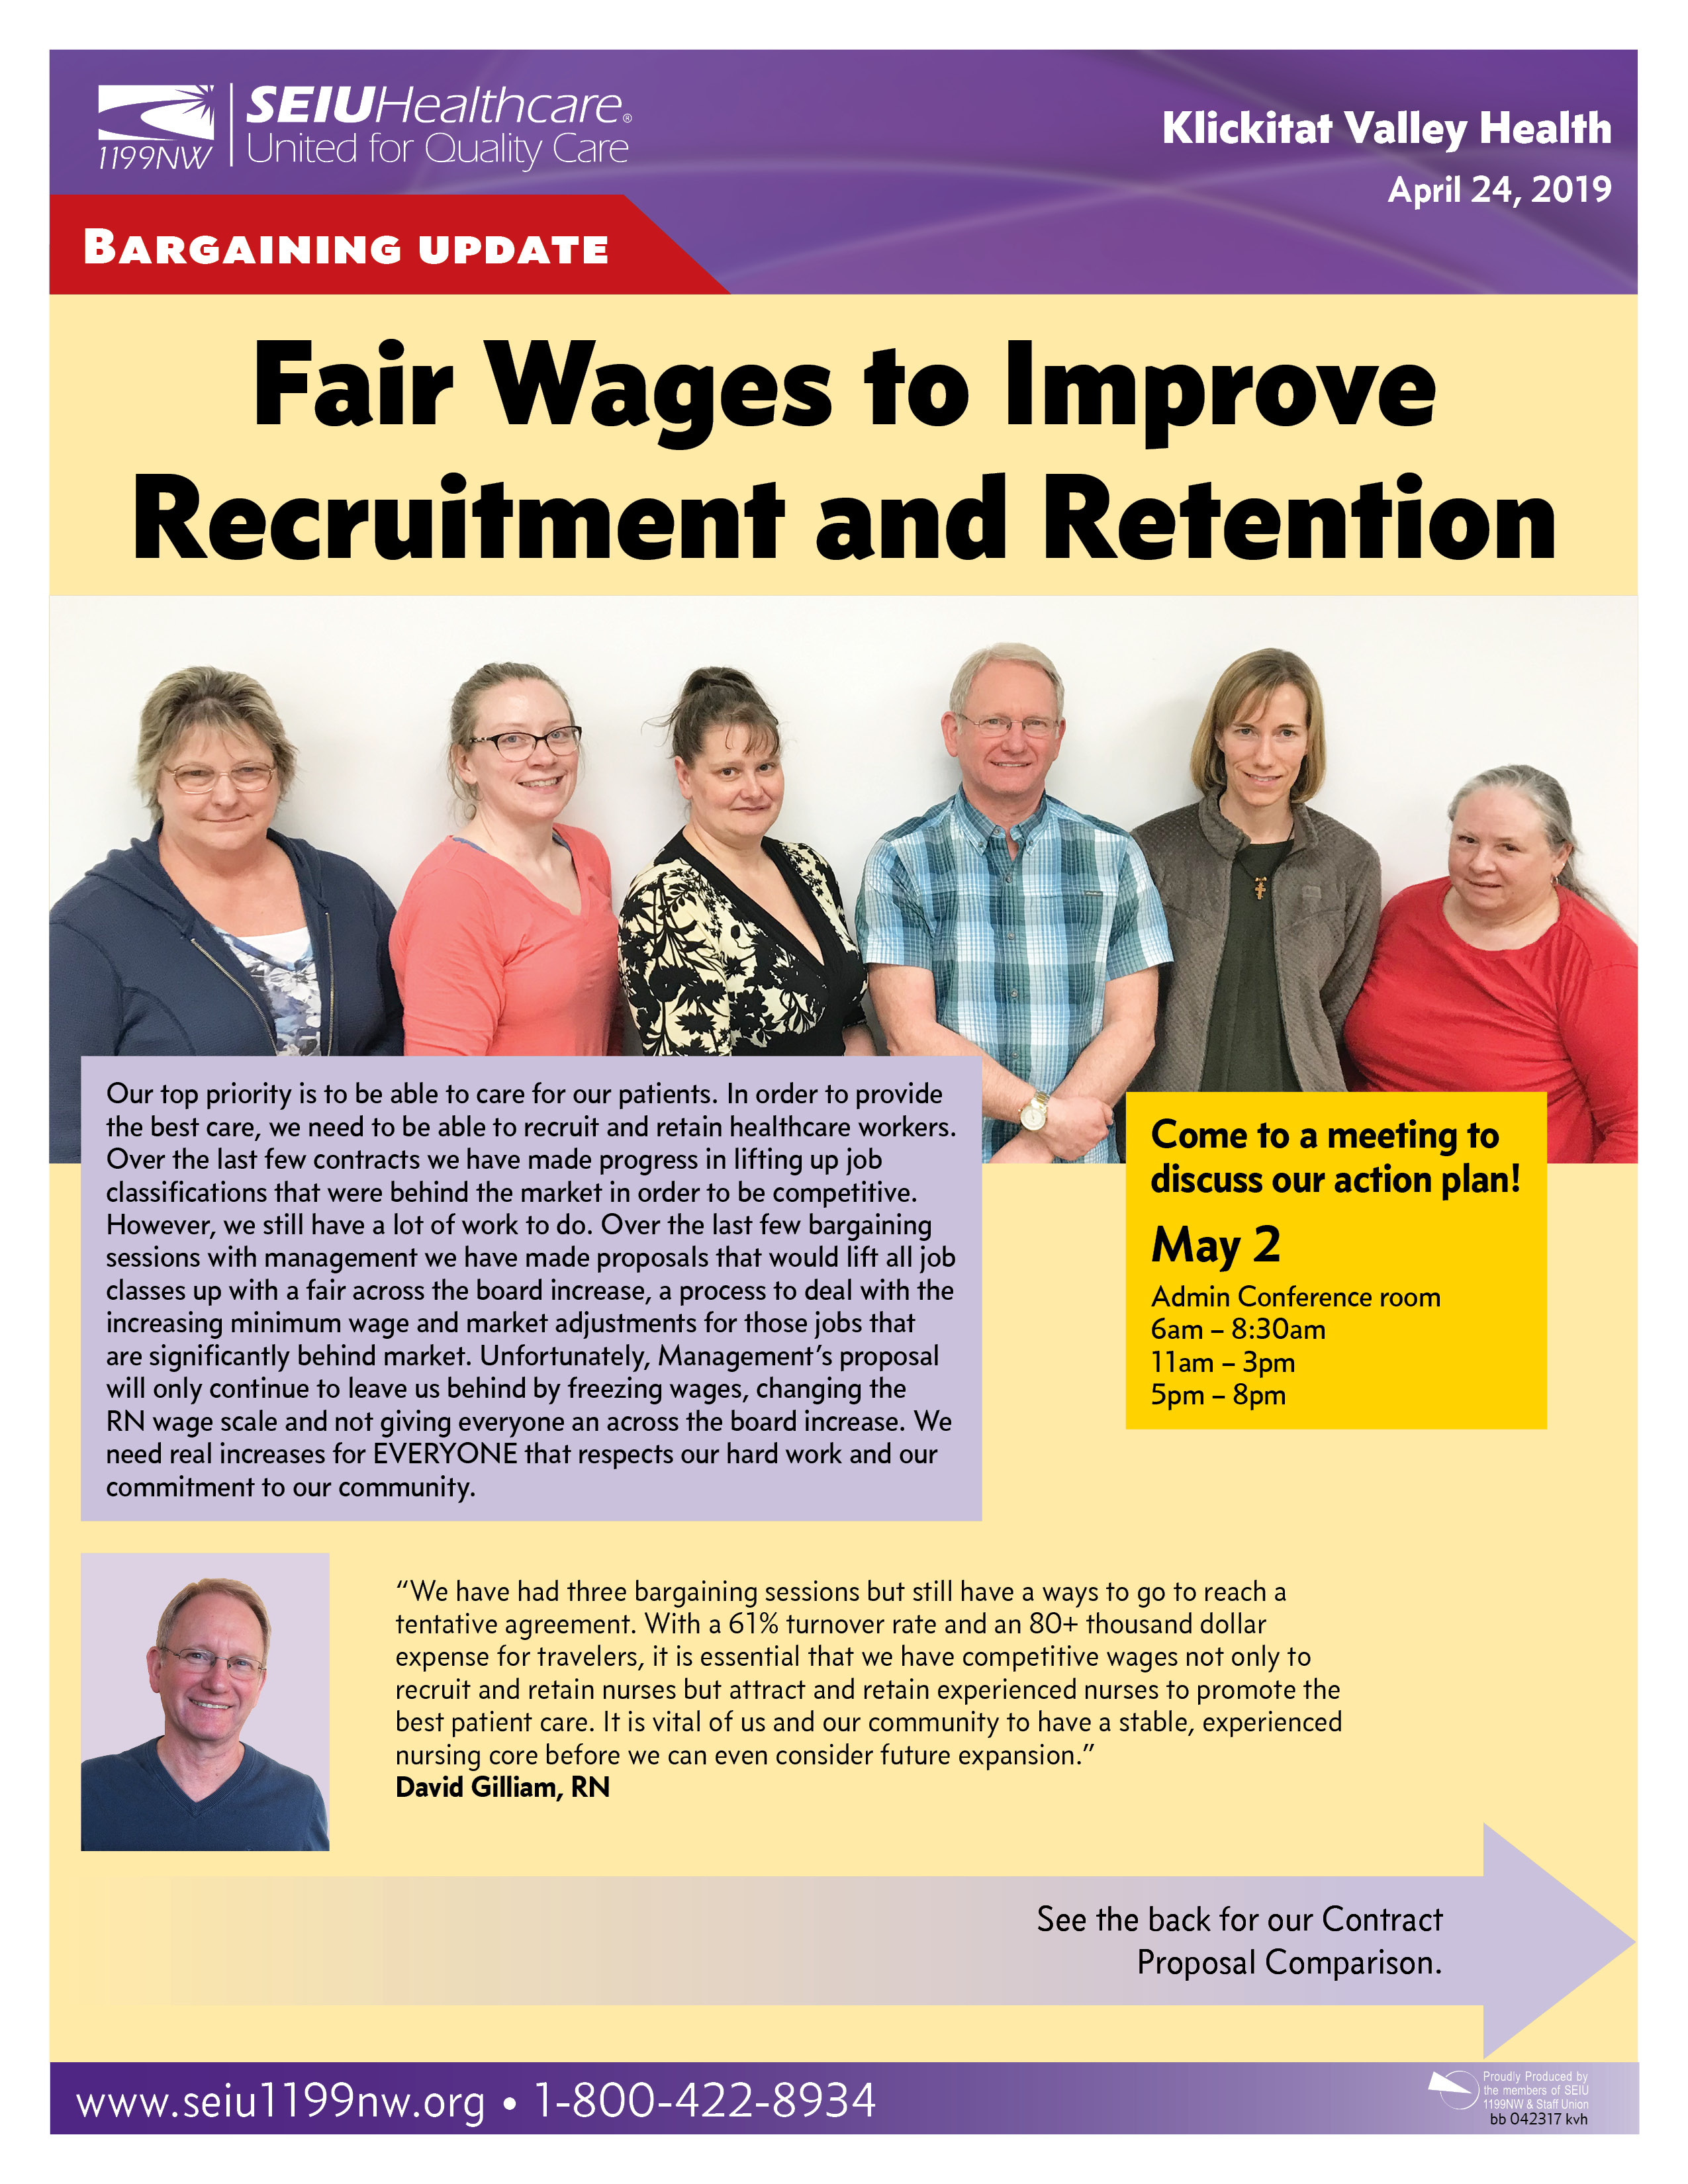 Fair Wages to Improve Recruitment and Retention